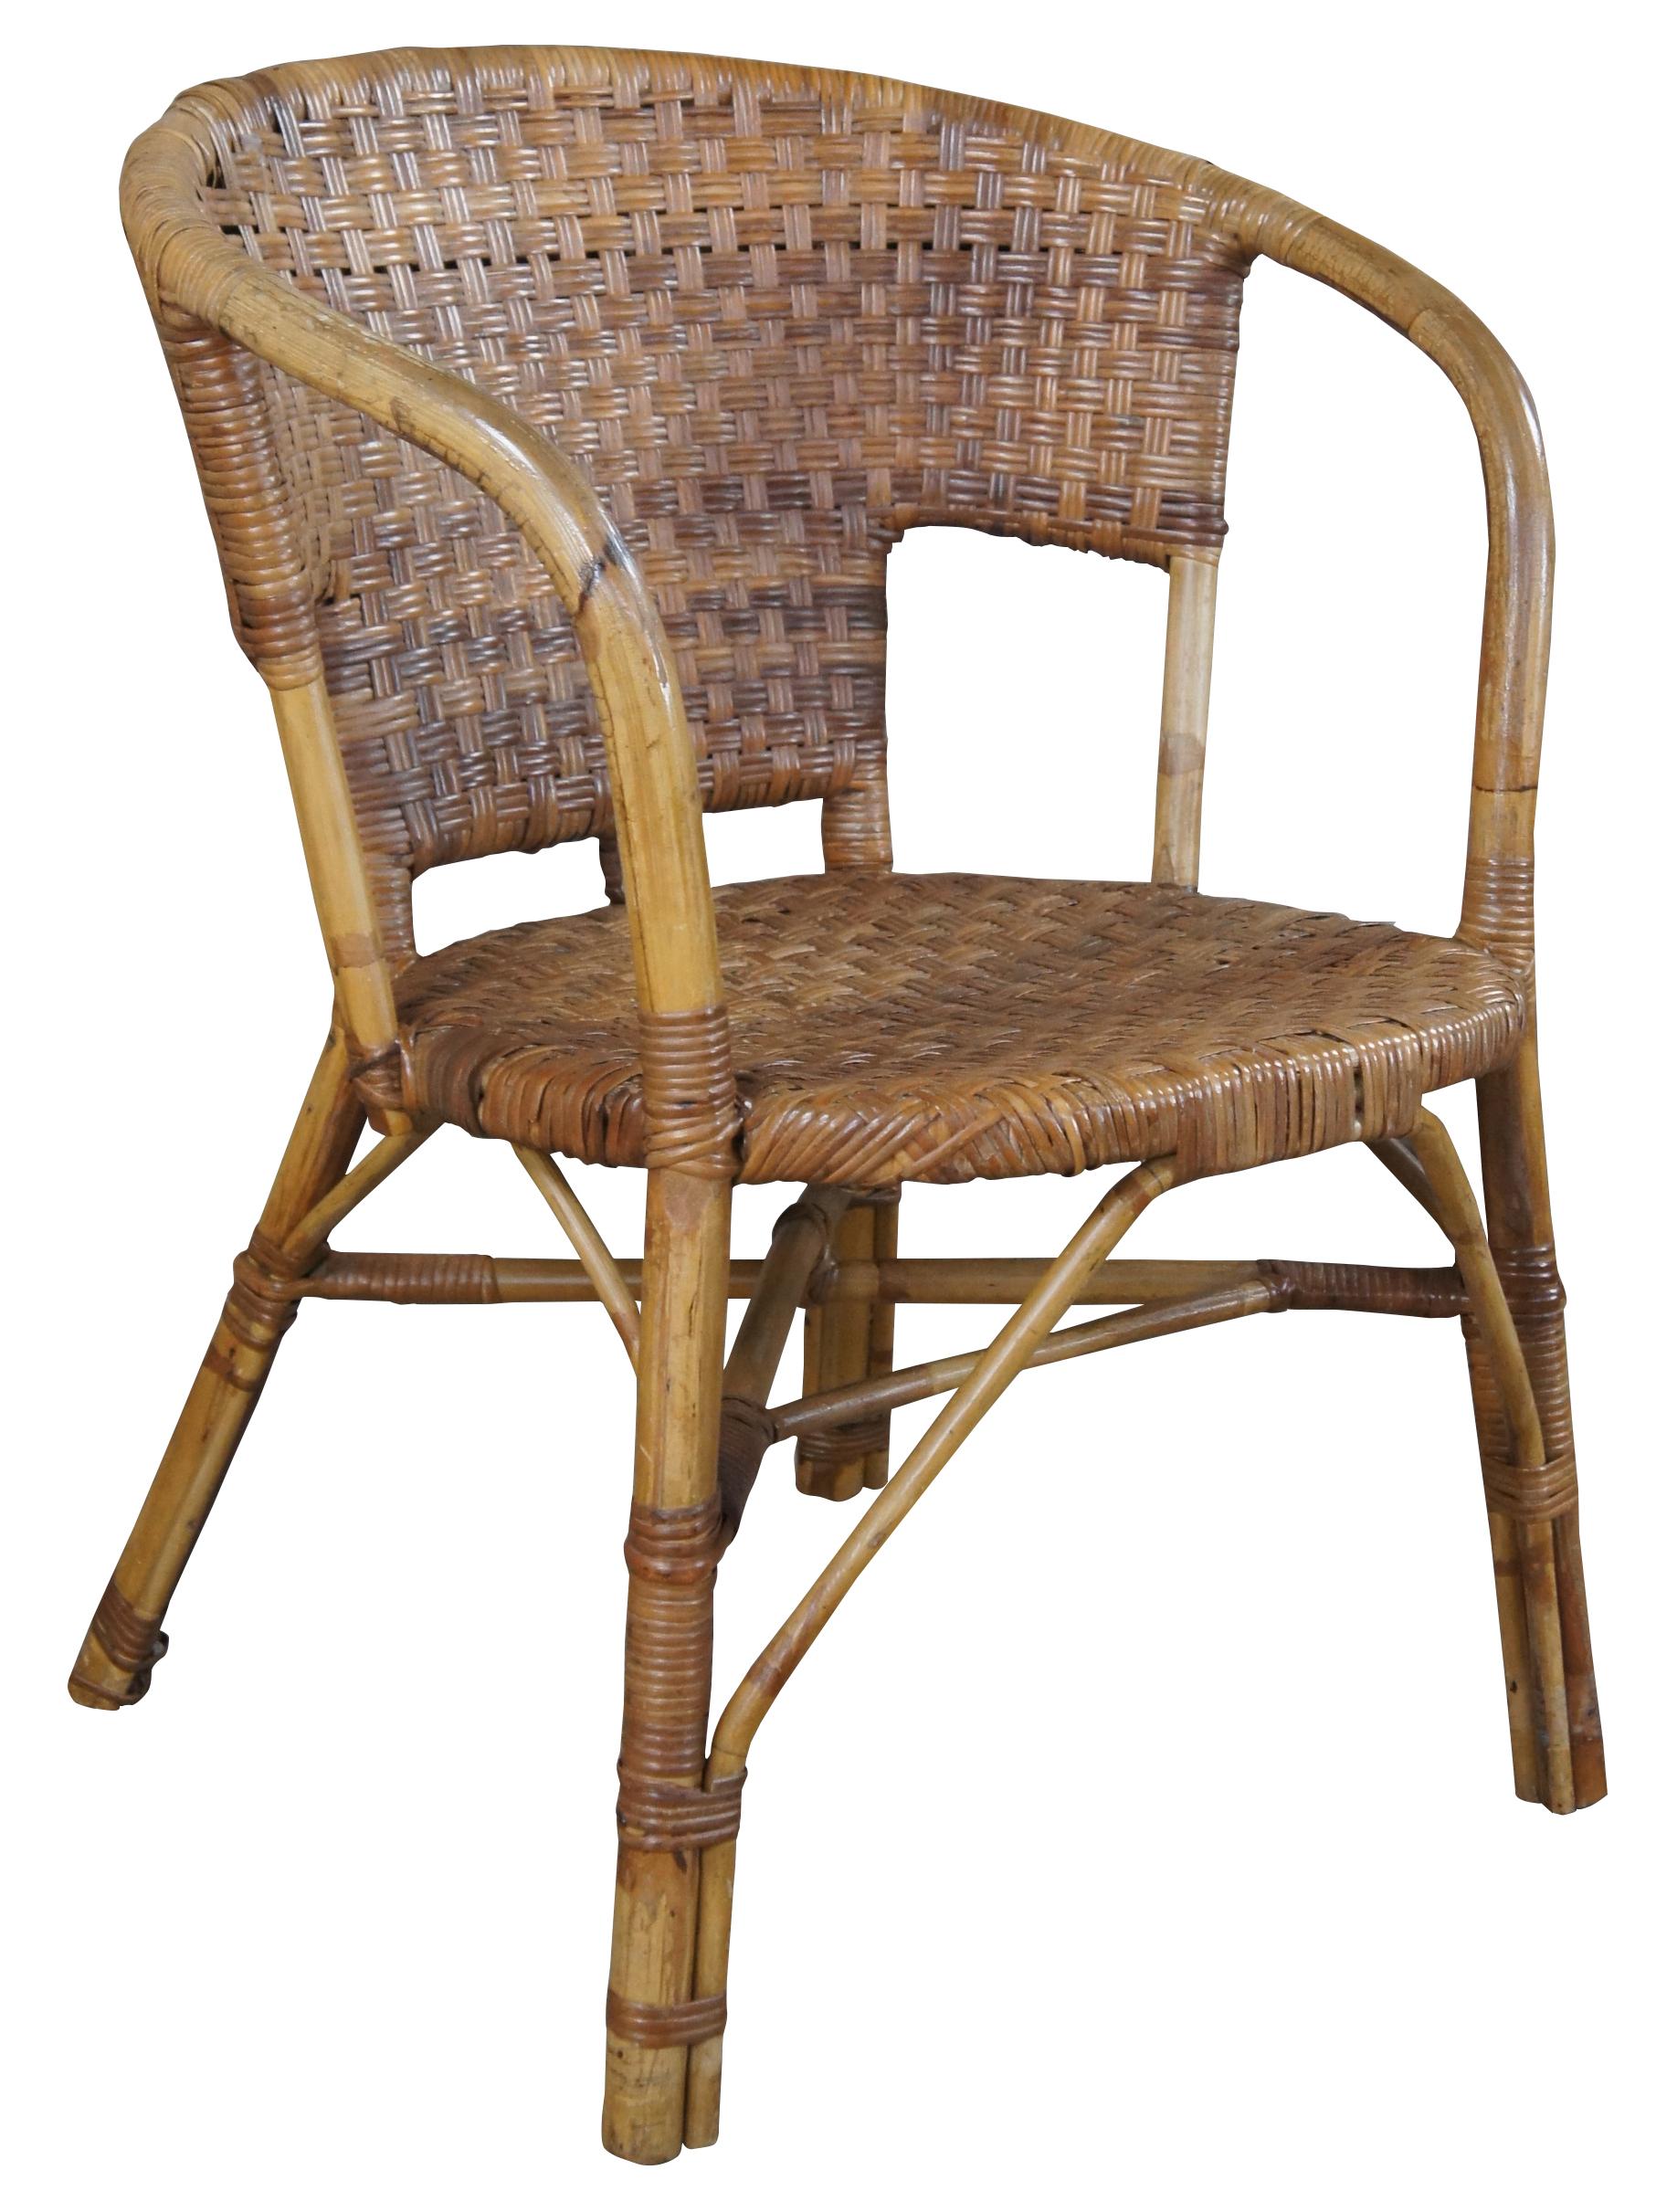 Antique bamboo and woven wicker / rattan armchair featuring rounded bentwood back with geometric woven pattern.
Measures: 30